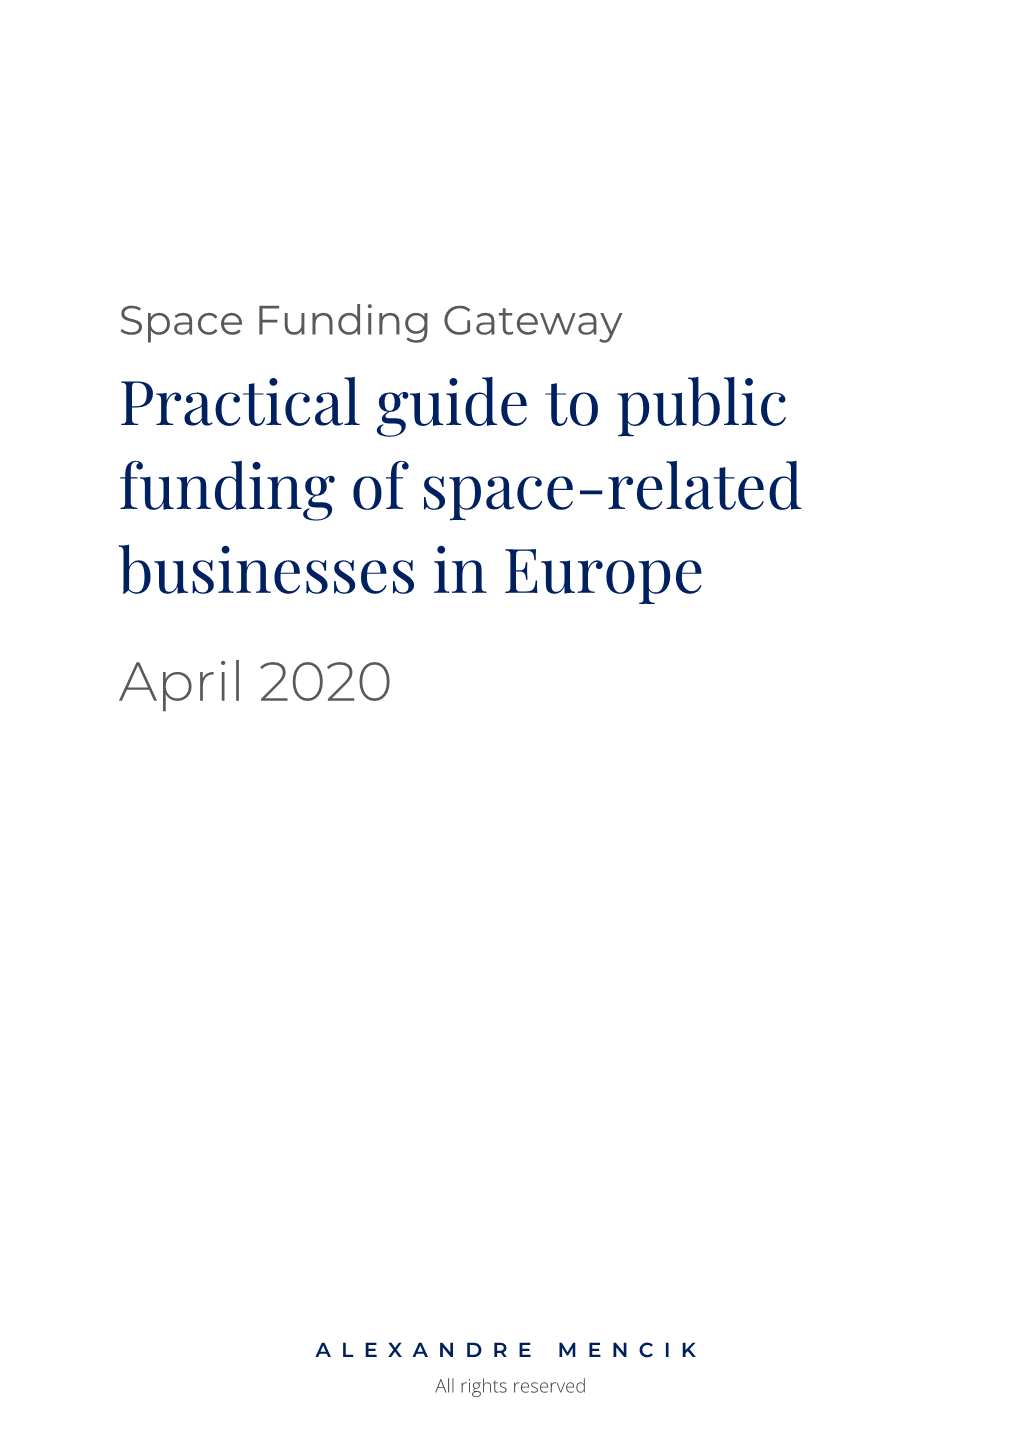 Practical Guide to Public Funding of Space-Related Businesses in Europe April 2020